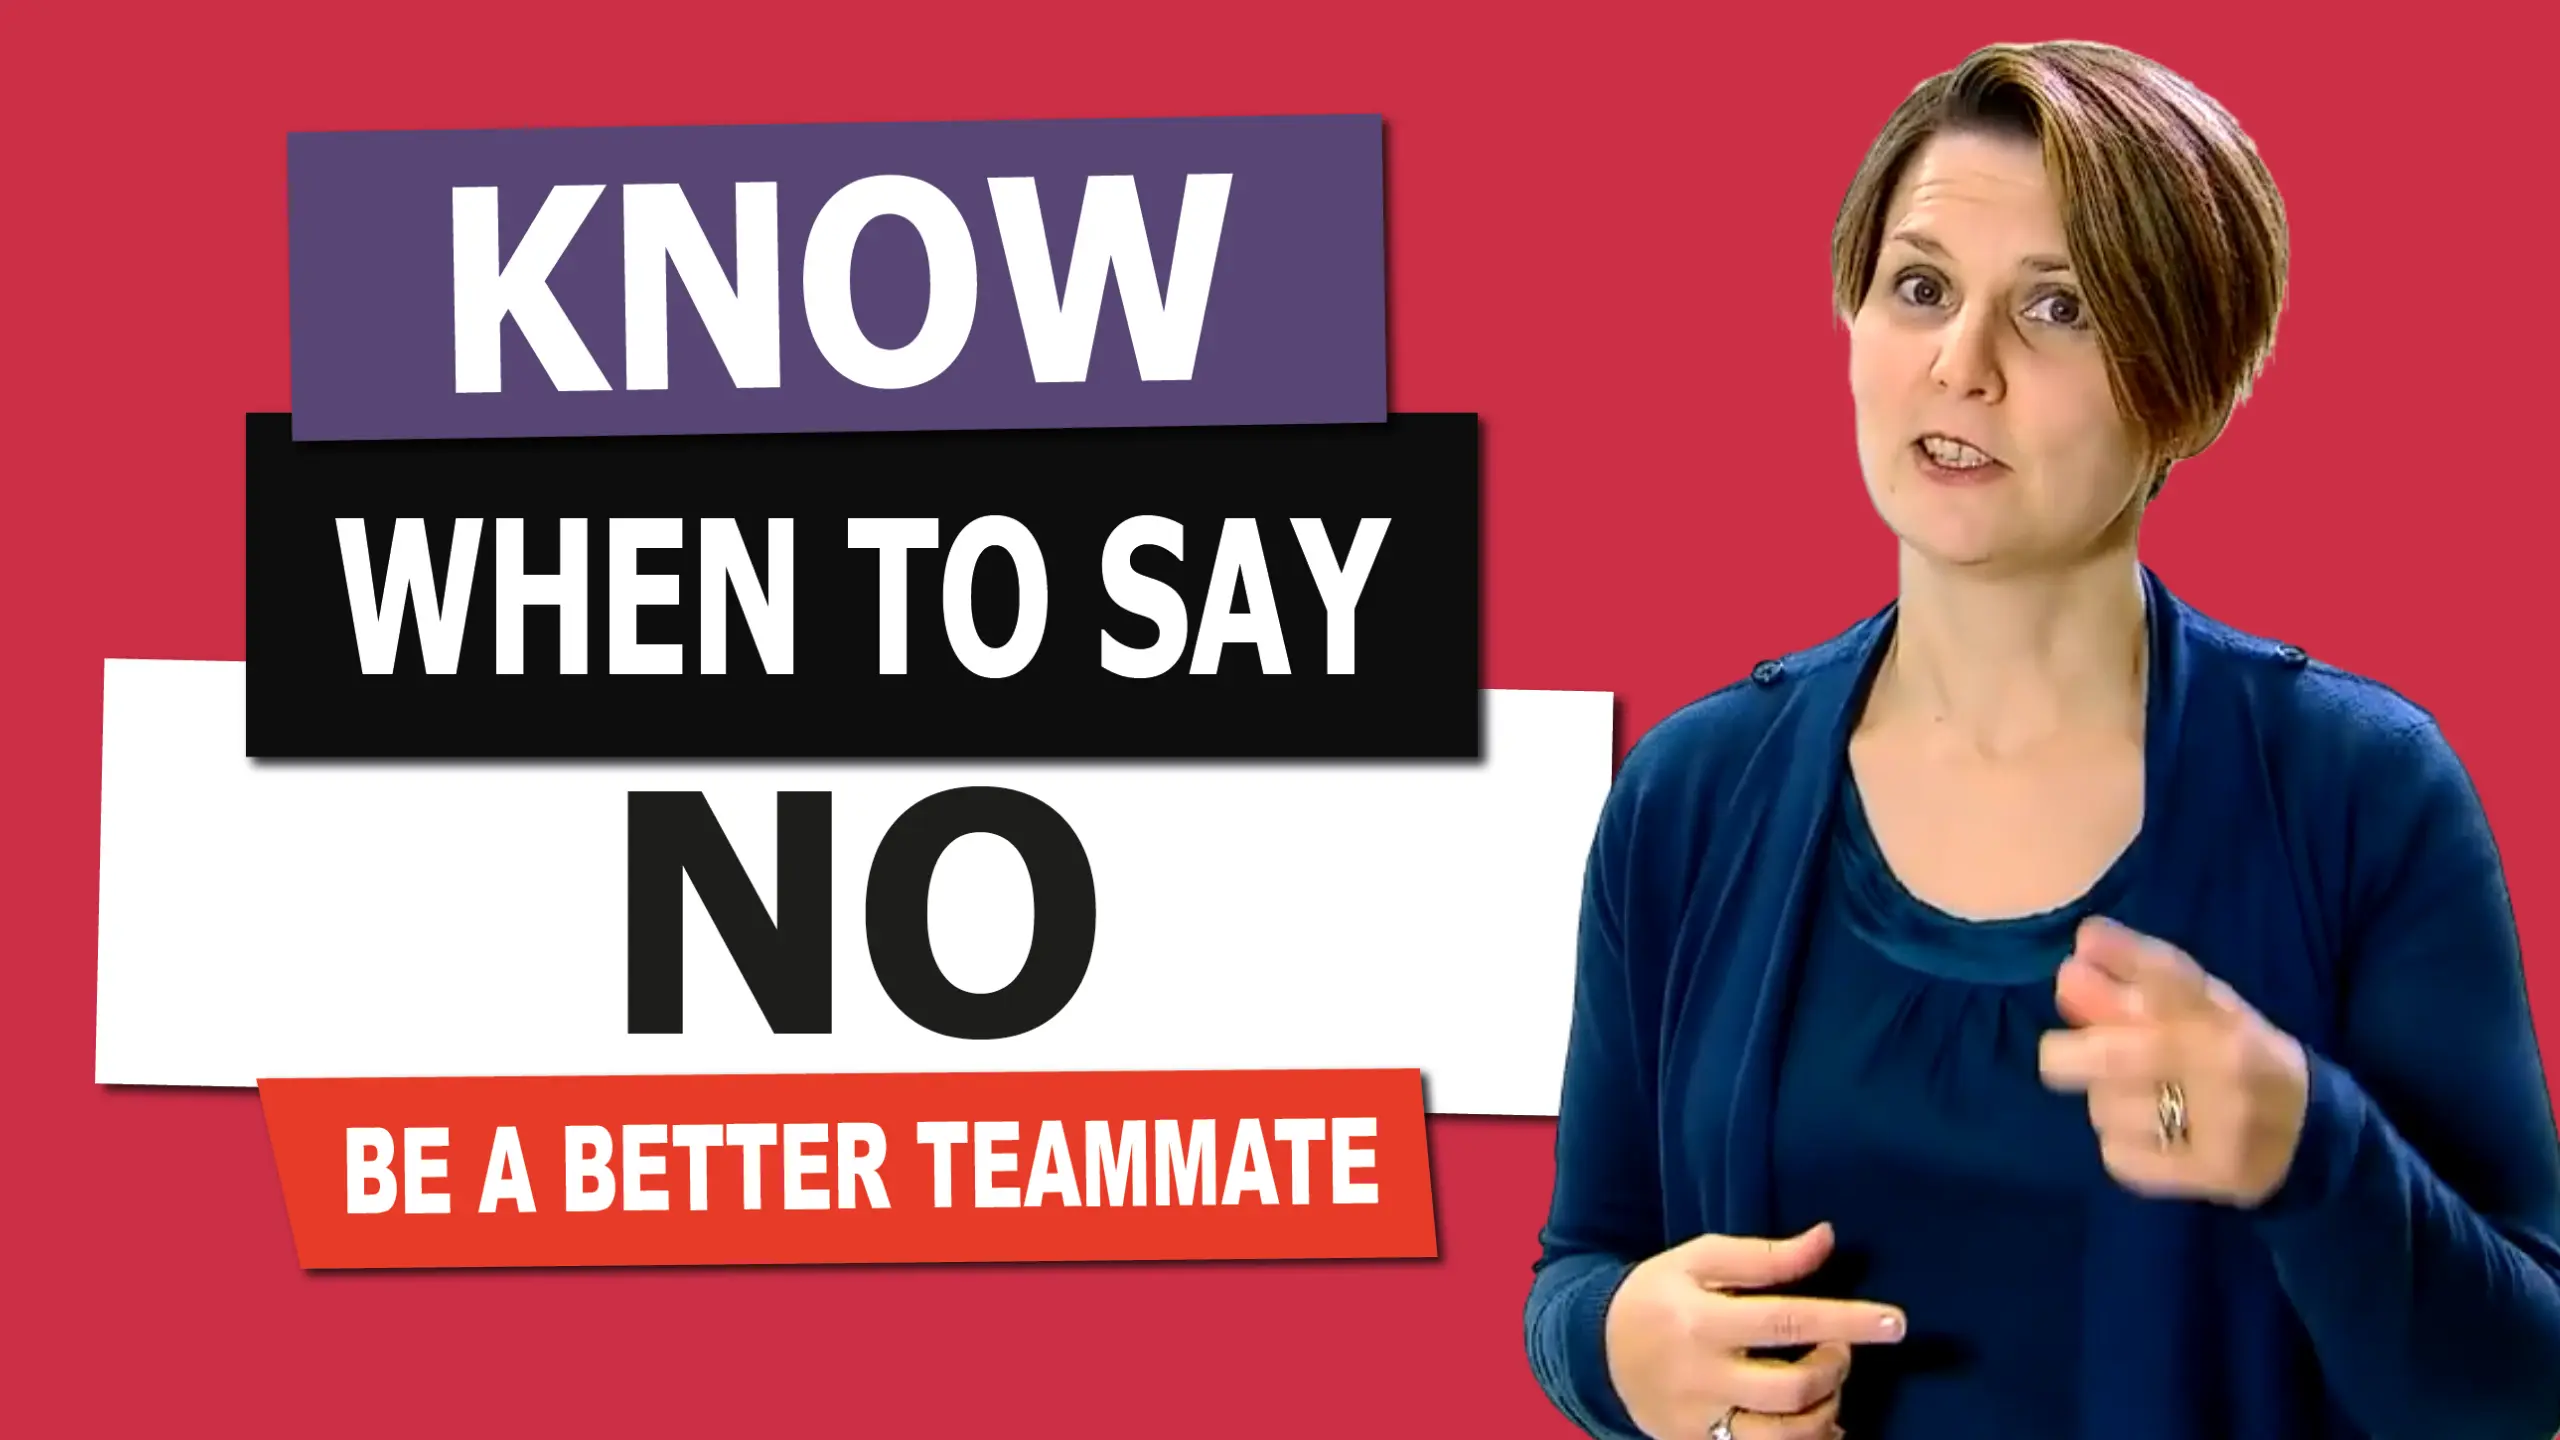 Know When to Say No with Liane Davey